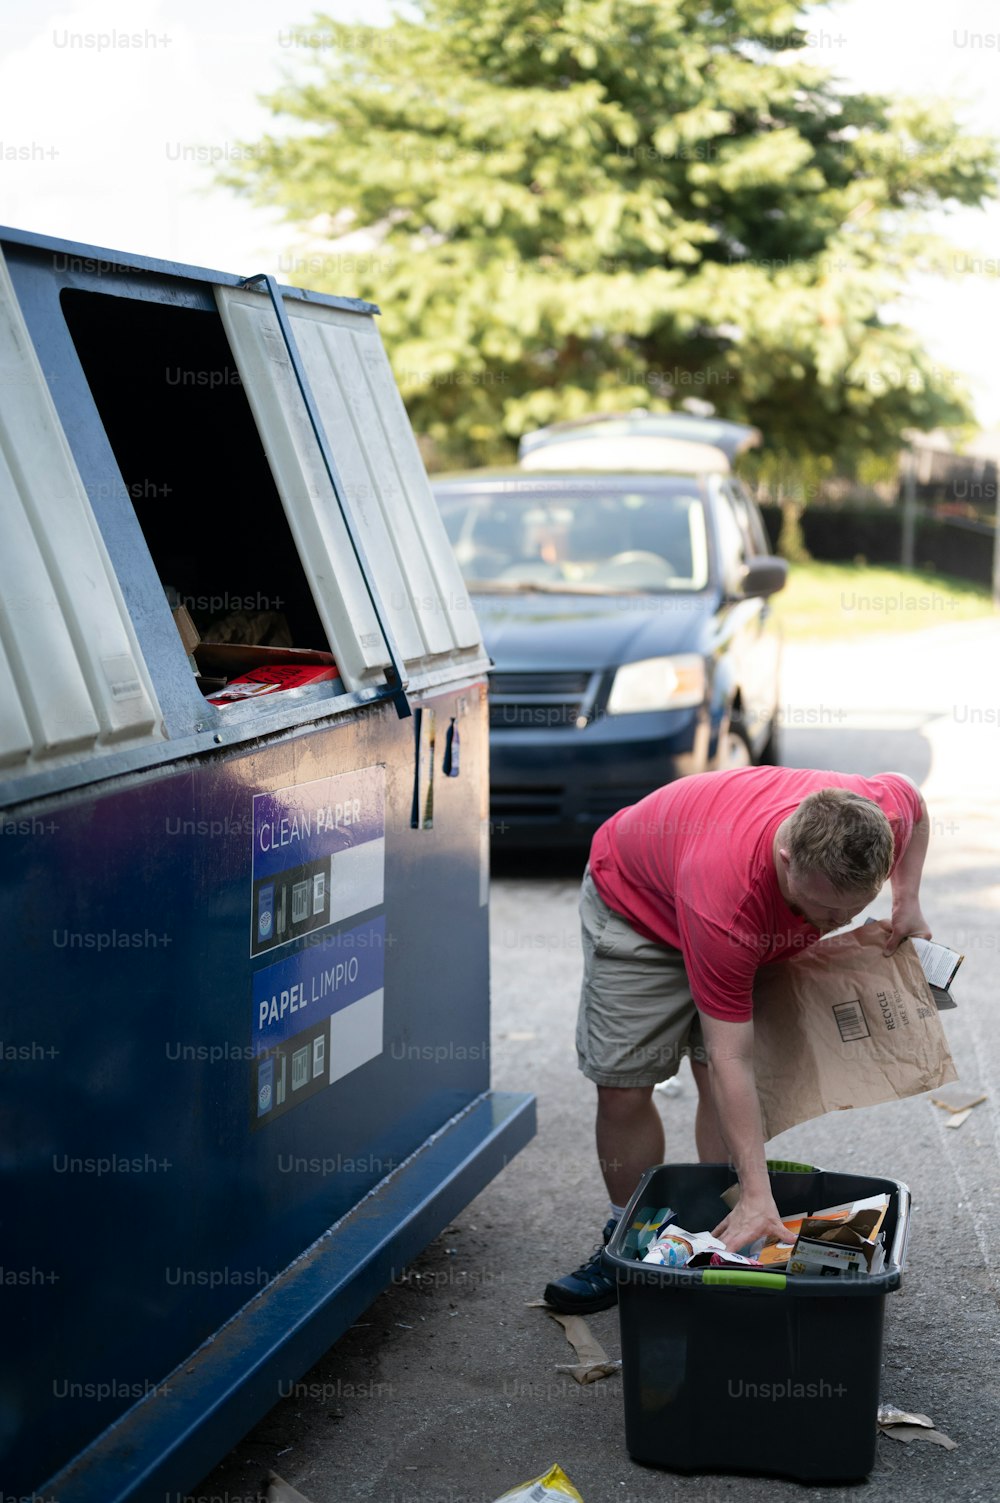 a man unloading a box of items from a van